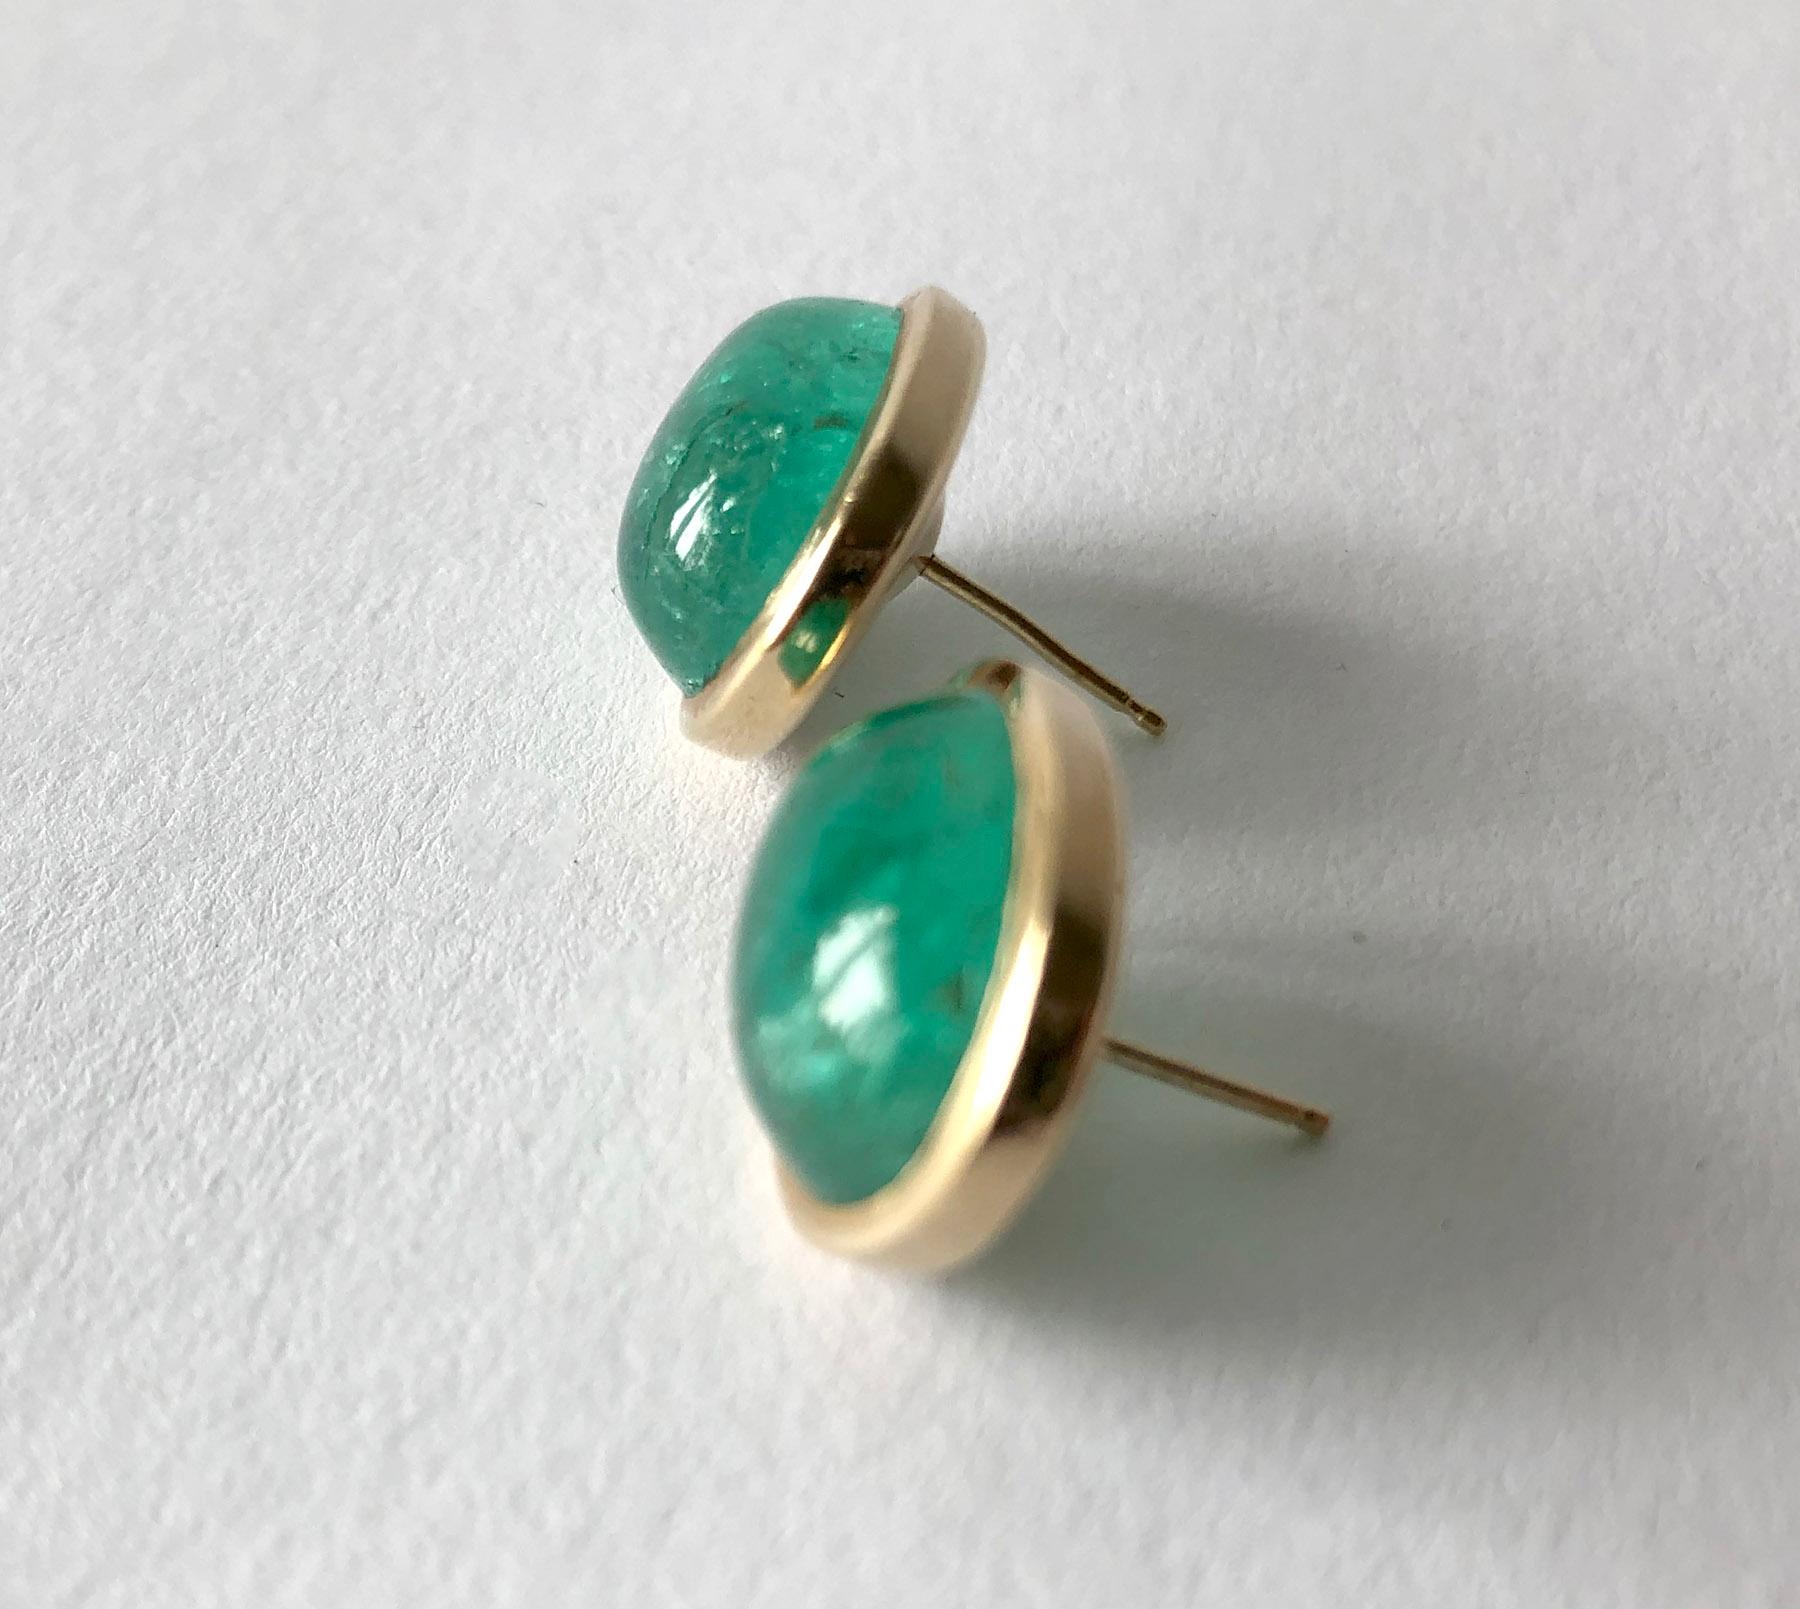 Pair of oval emerald earrings set in gold, circa 1950's.  Earrings are rich in color with natural inclusions. The emeralds are approximately 9 ct each.  The overall measurement of the earrings are 3/4